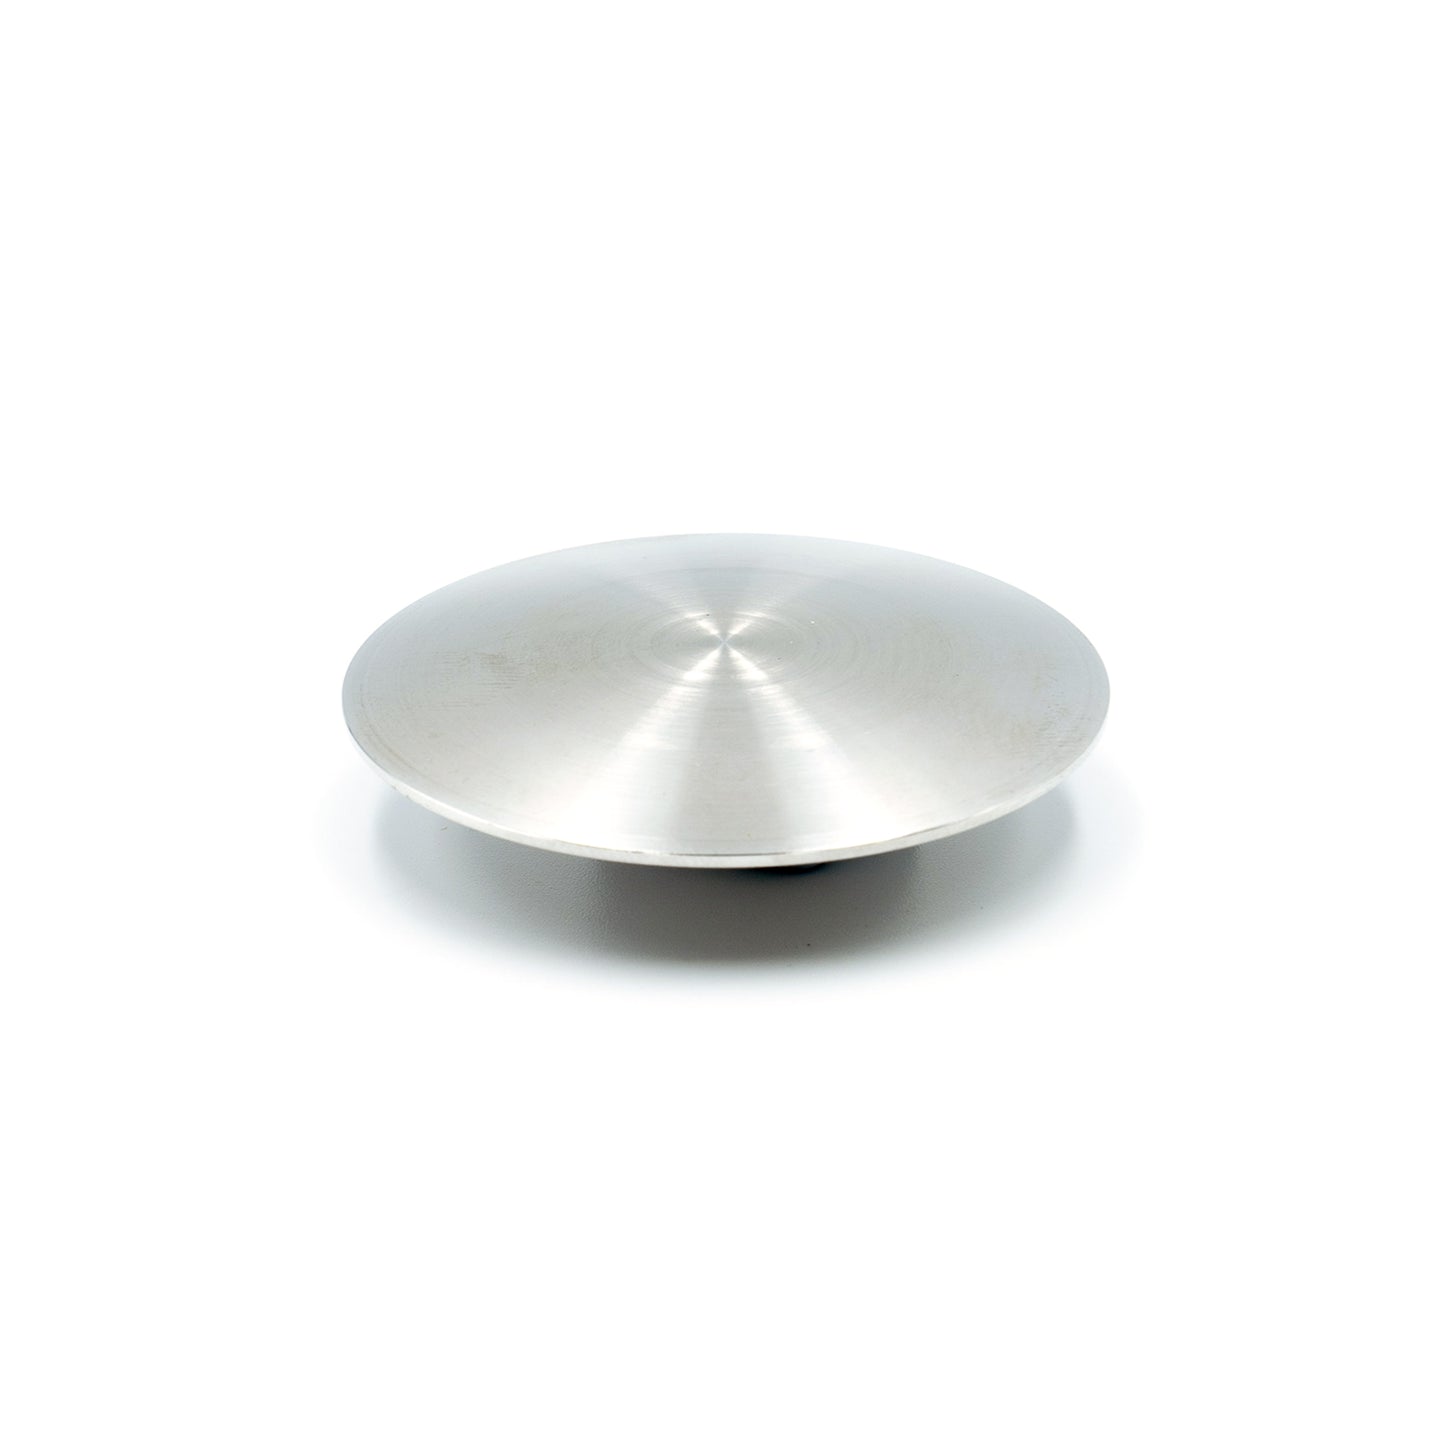 The Force Tamper 58.5mm Convex Base